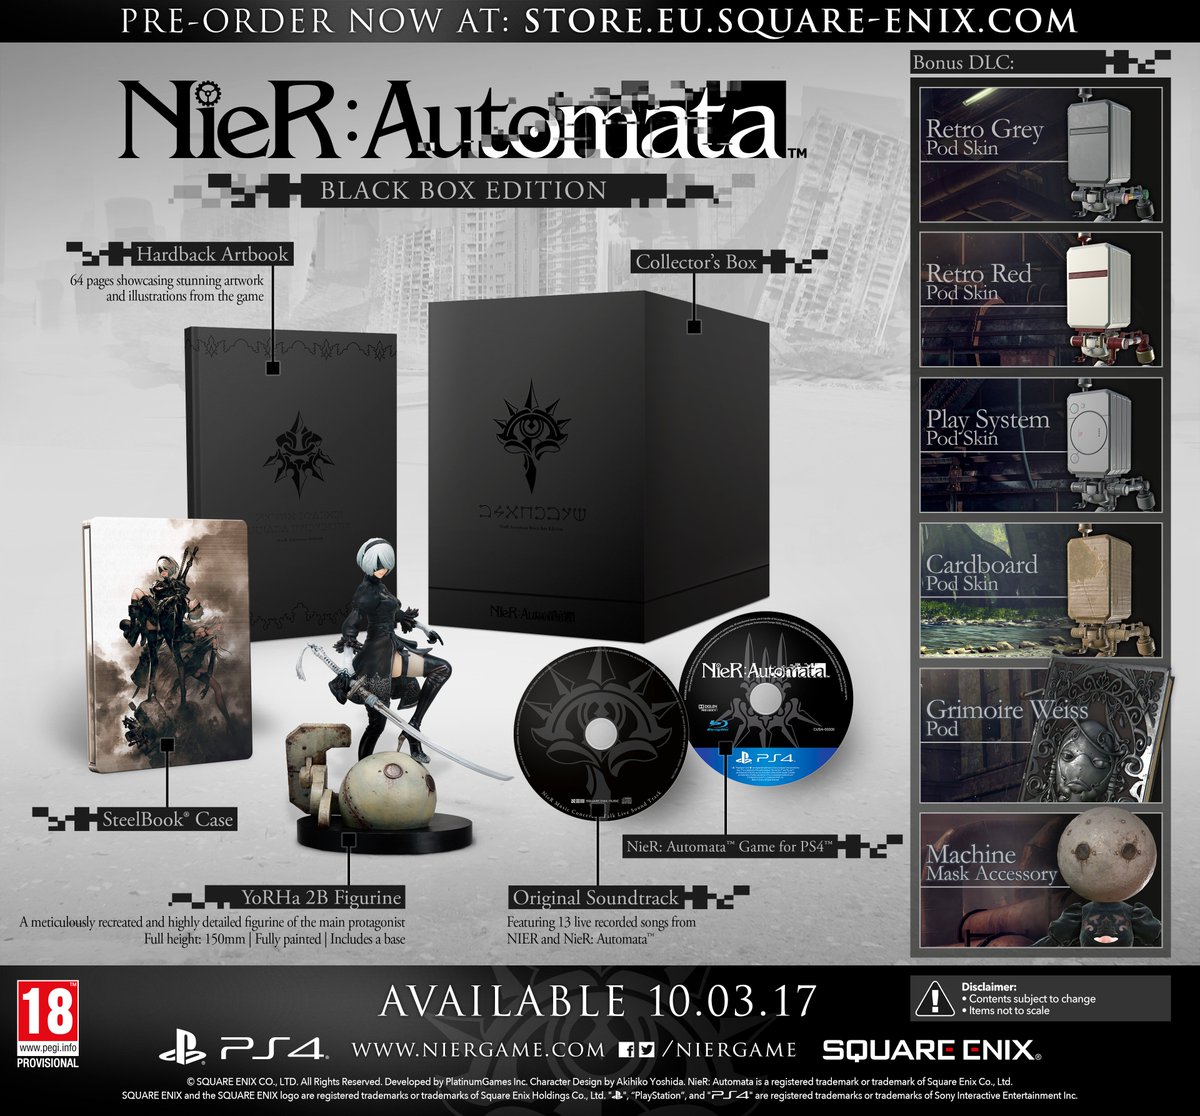 Nier Series There Are Still Some Copies Of The Nier Automata Black Box Edition Left In Some Regions Get One Before They Go T Co 078zbwesfw T Co Seaqtzmuma Twitter